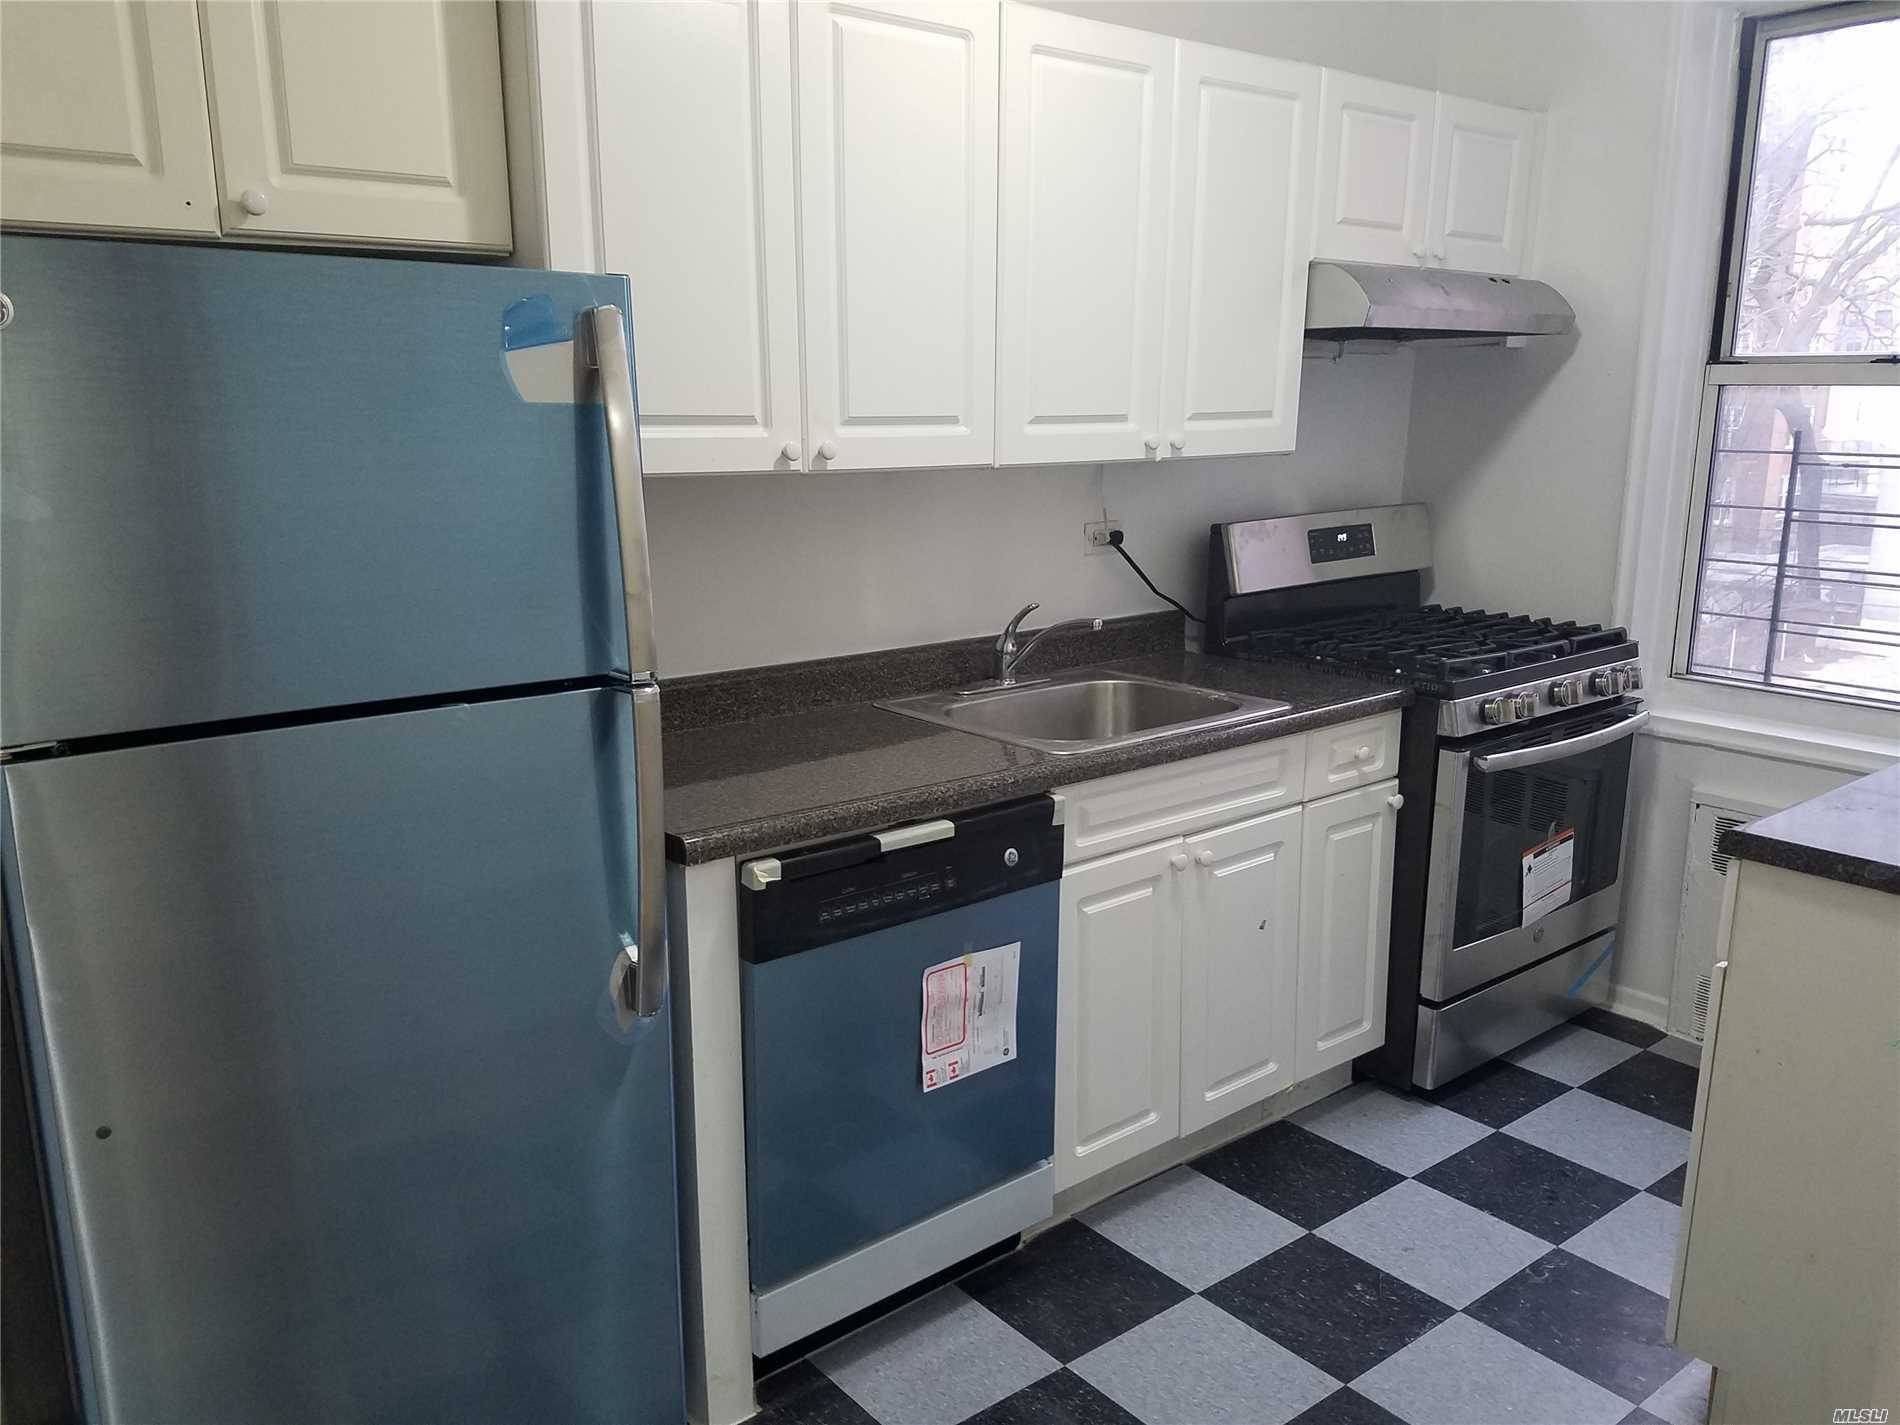 67th 3 BR House Forest Hills LIC / Queens